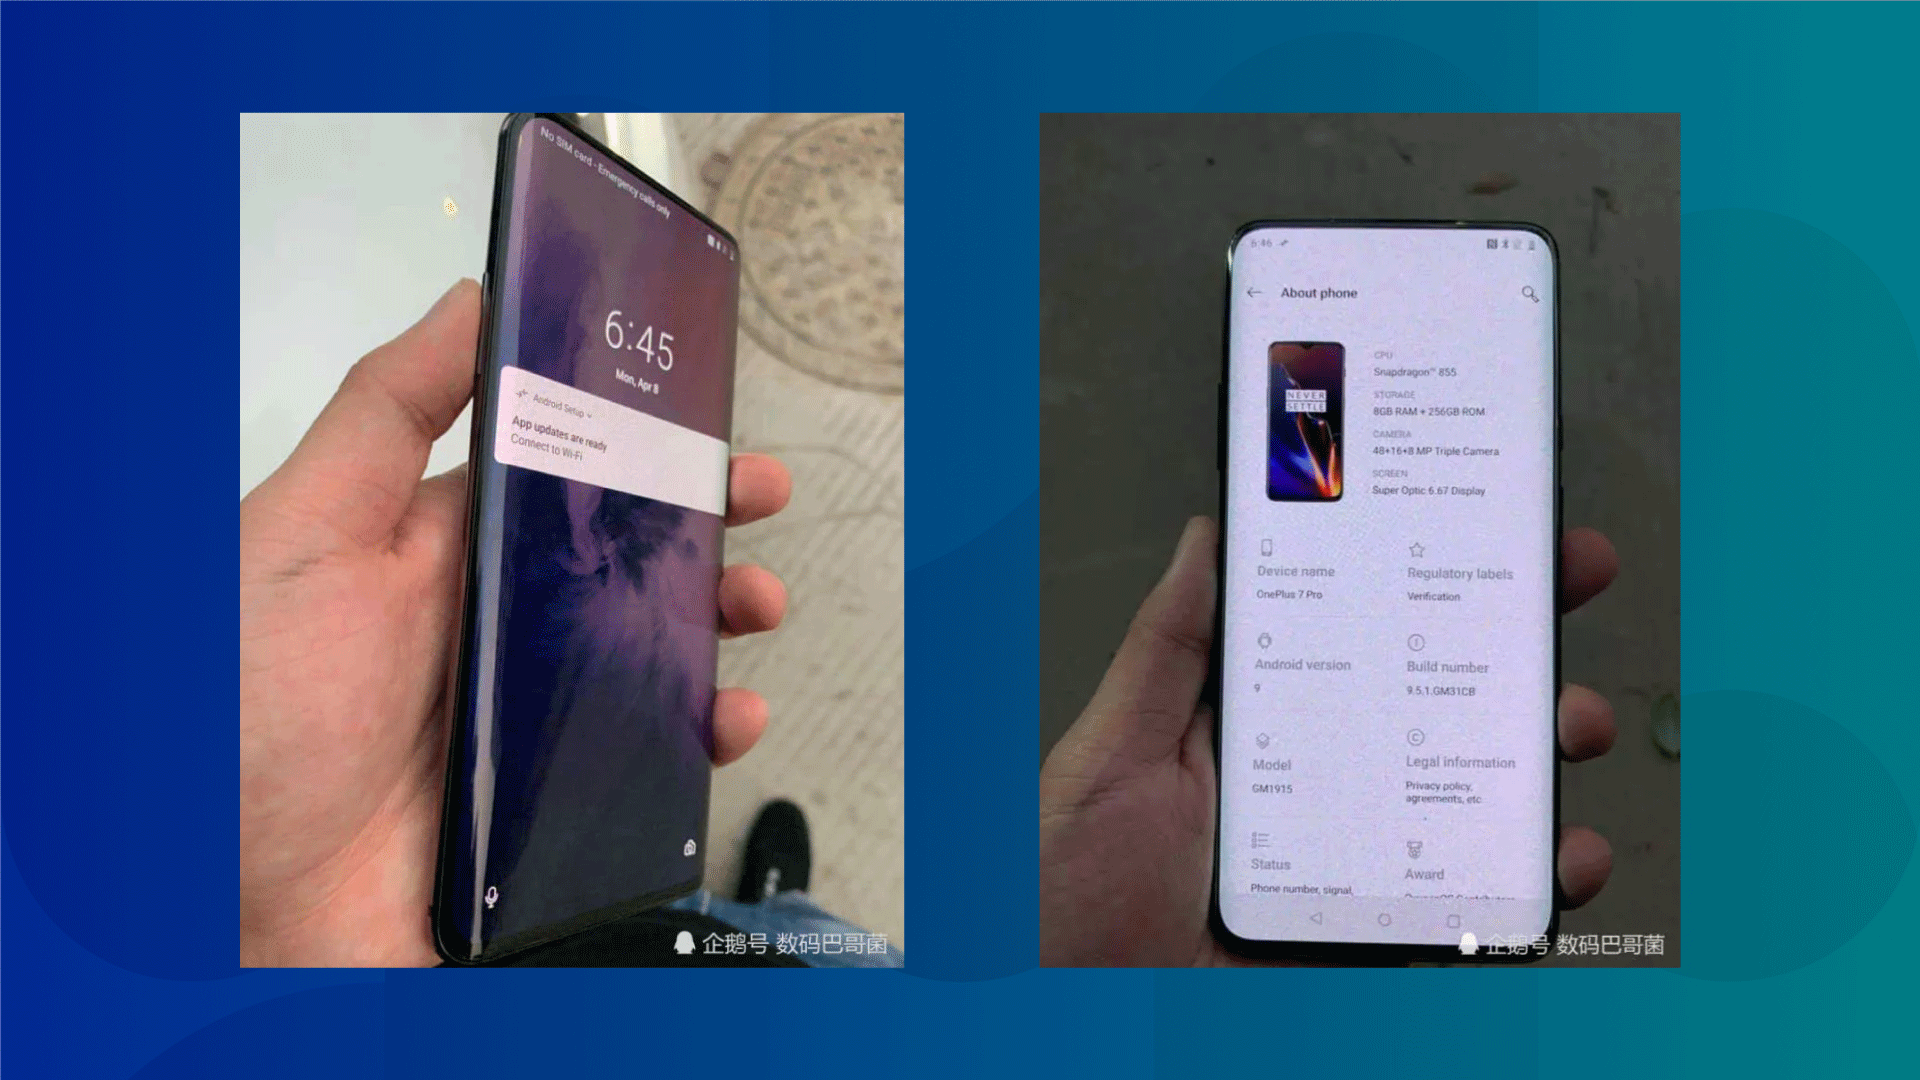 Pictures circulating on Chinese social media show a purported OnePlus phone with a curved screen and no notch. They’re in line with previous rumors hinting that the new device will have a pop-up camera. (Picture: via Weibo)